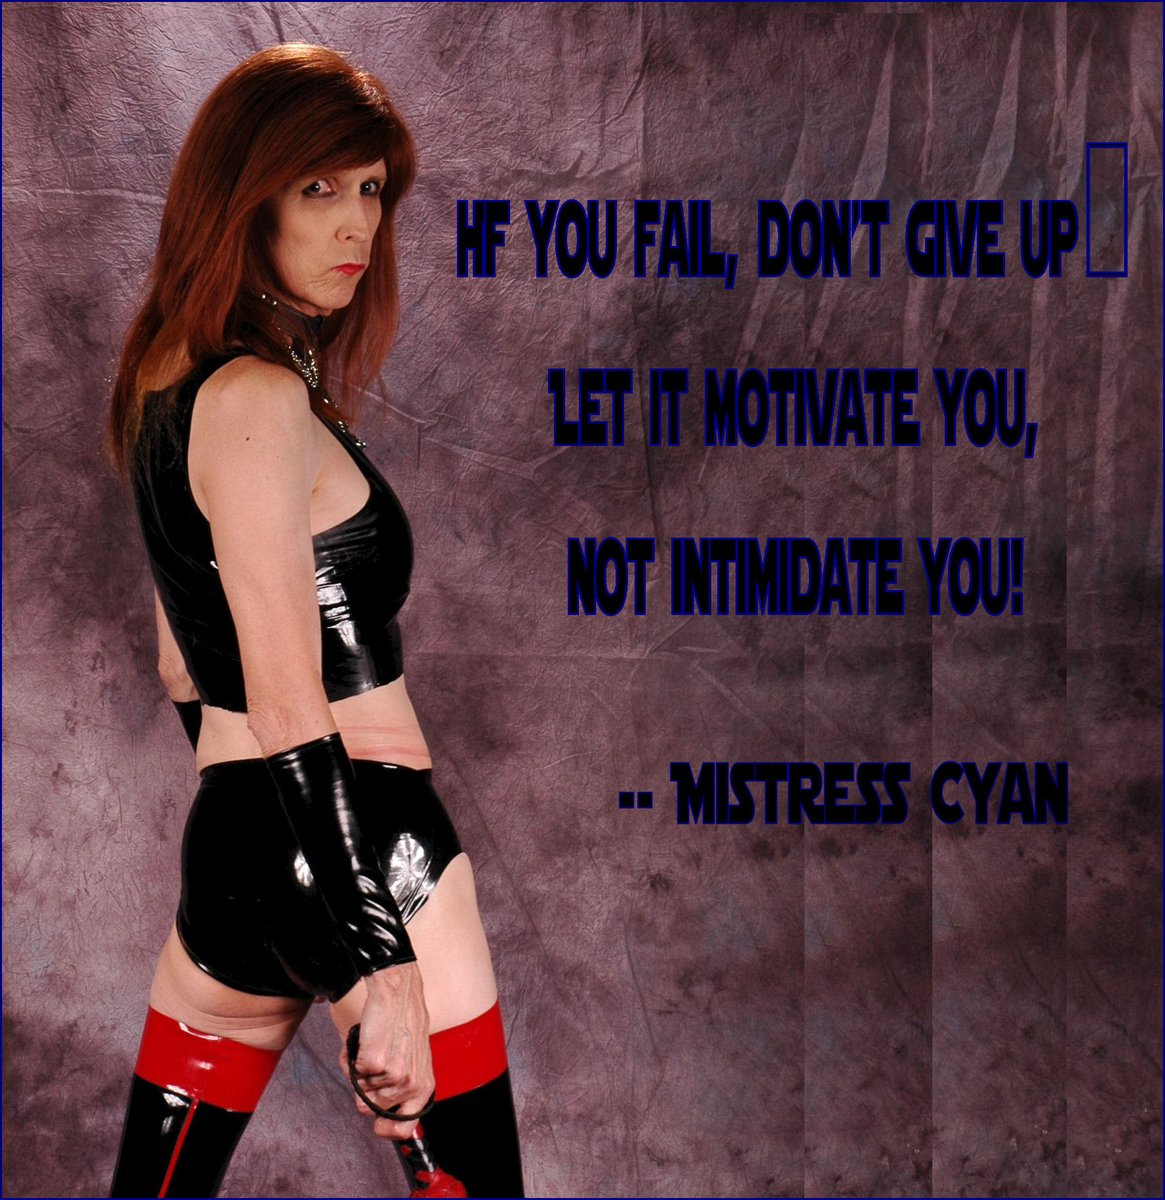 If you fail, don't give up...
Let it motivate you,
not intimidate you!